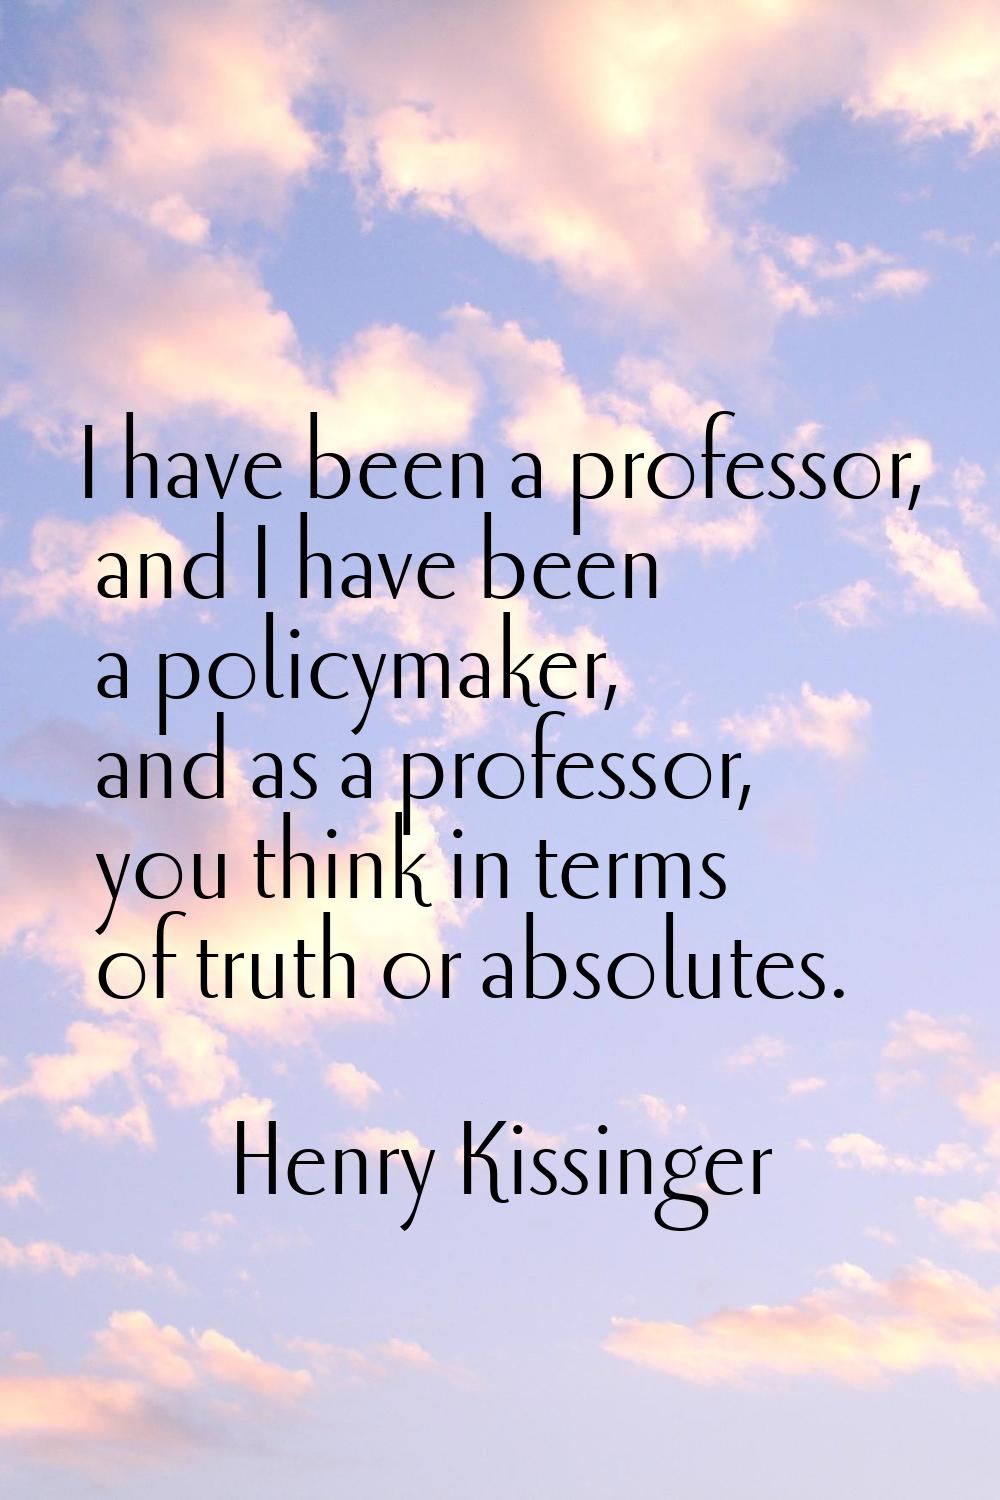 I have been a professor, and I have been a policymaker, and as a professor, you think in terms of t